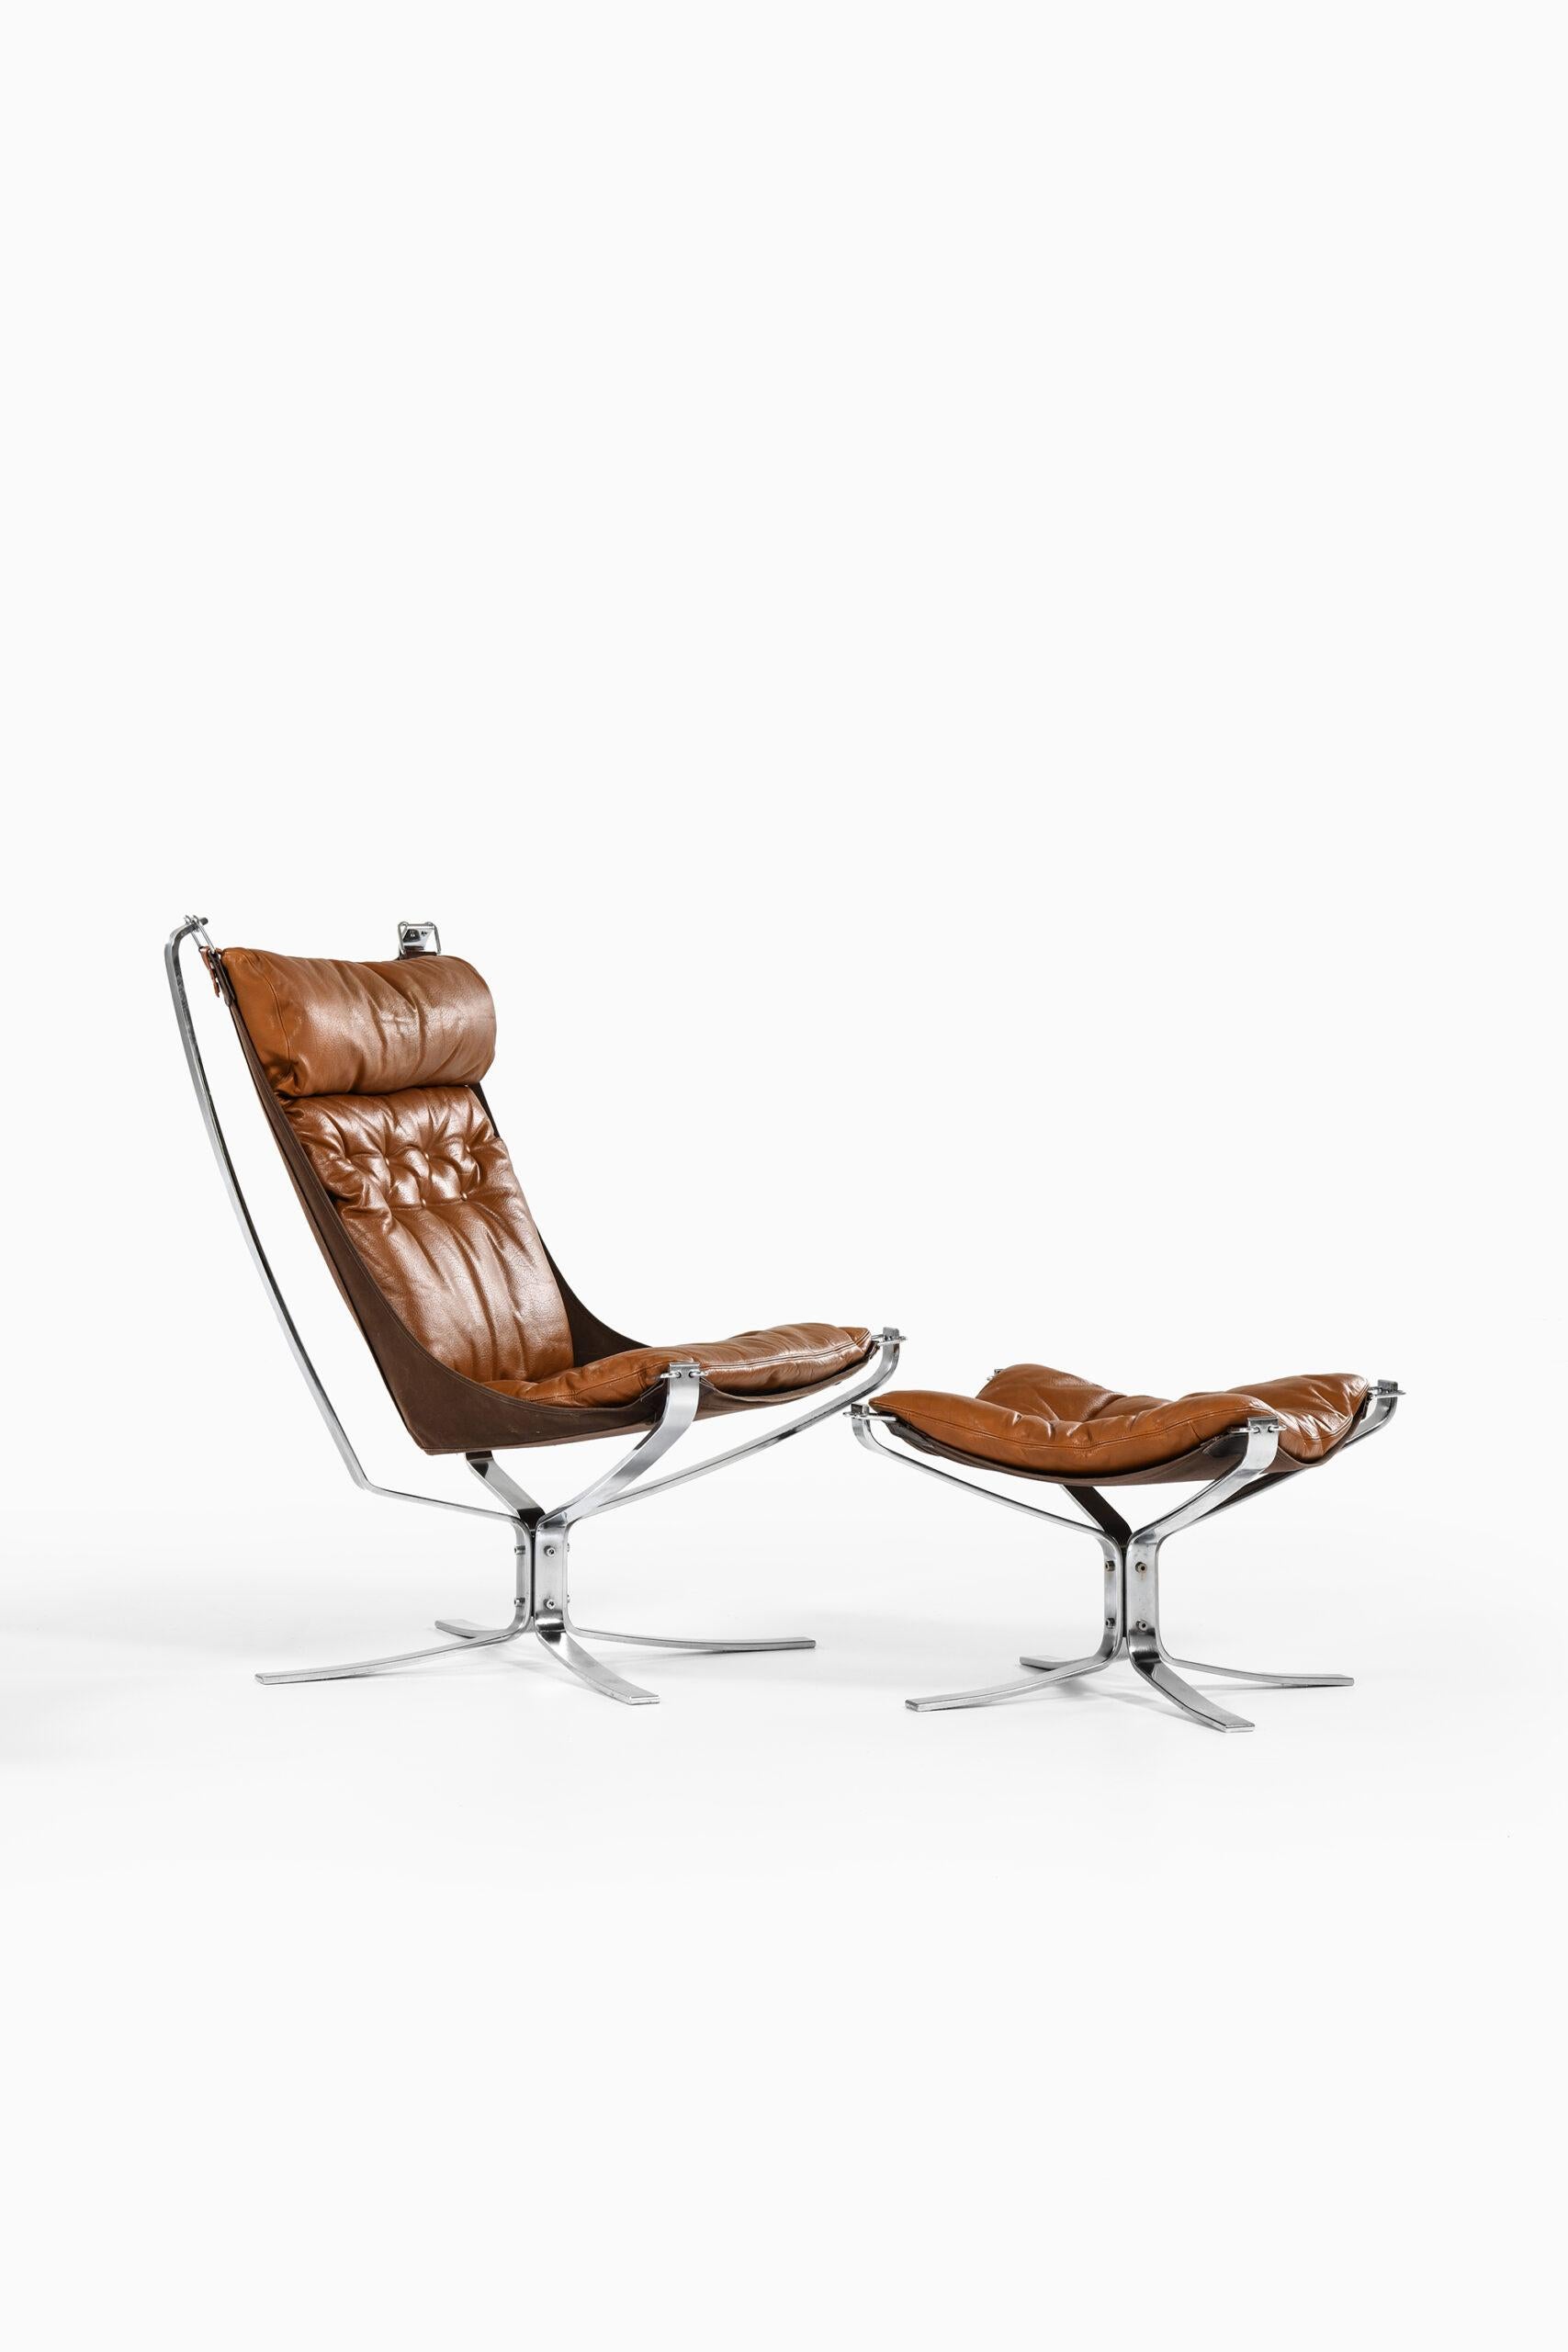 Sigurd Resell Seating Group Model Falcon Produced by Vatne Møbler in Norway For Sale 5